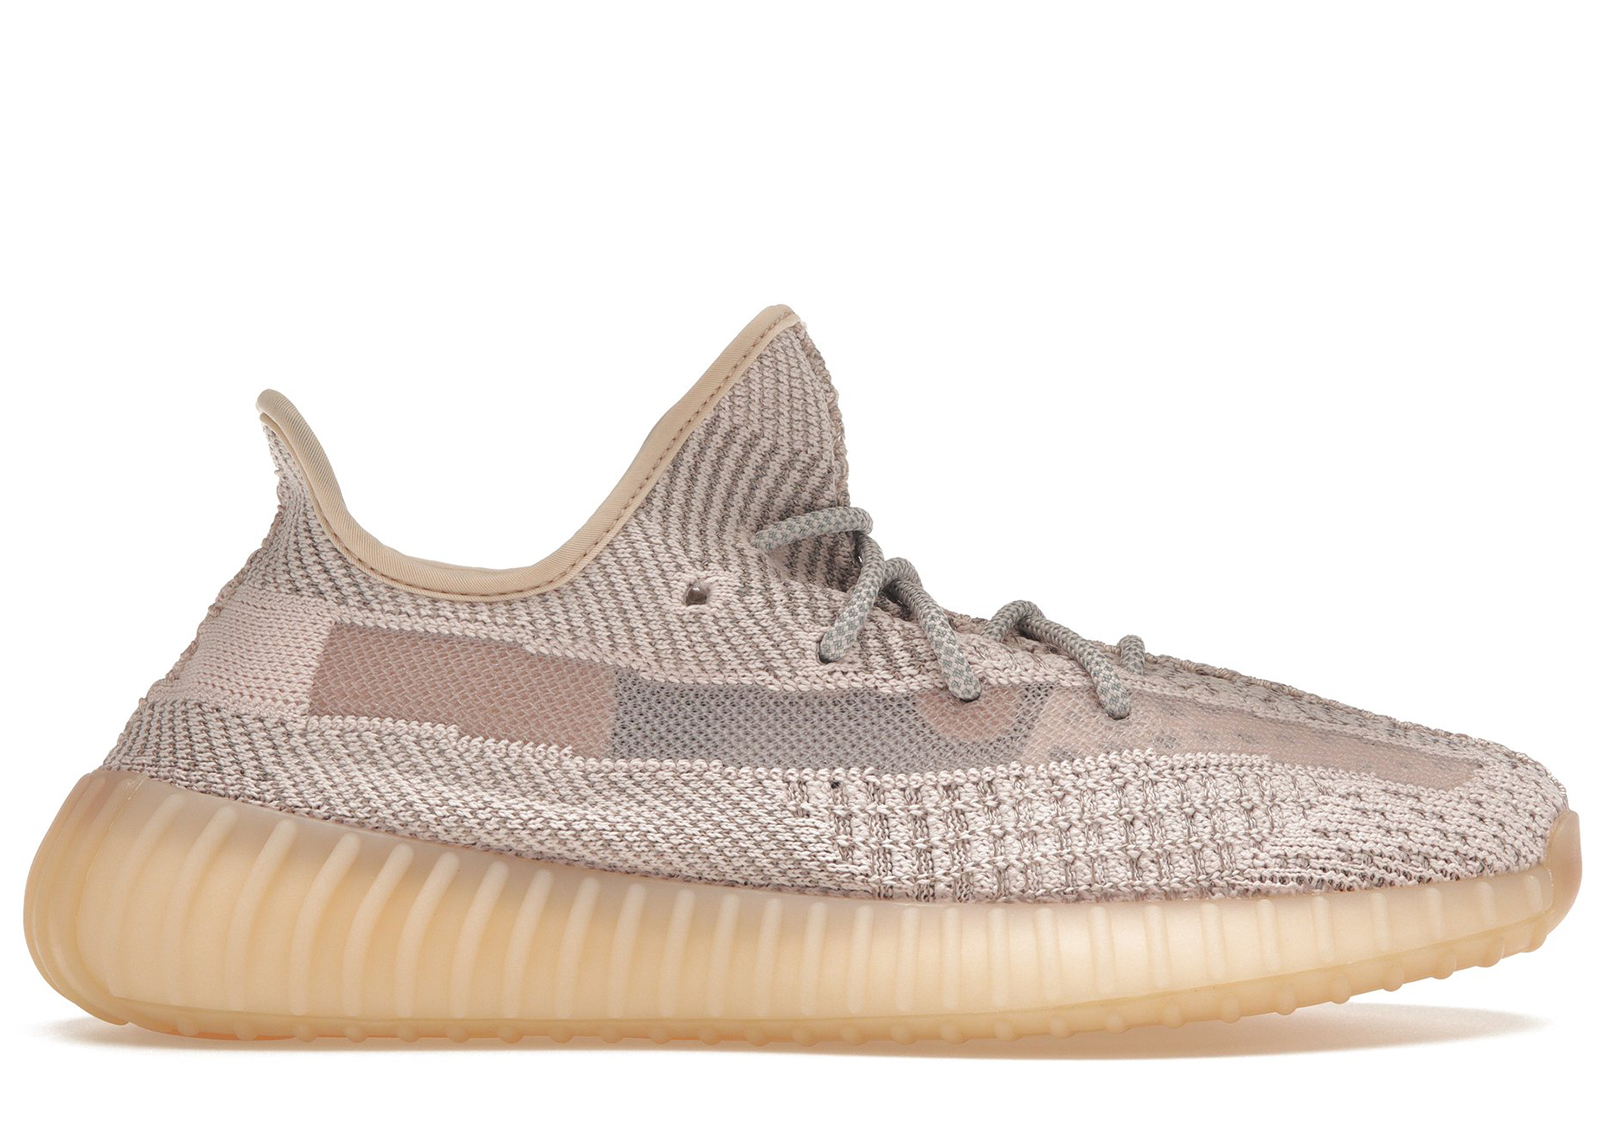 synth yeezy 350